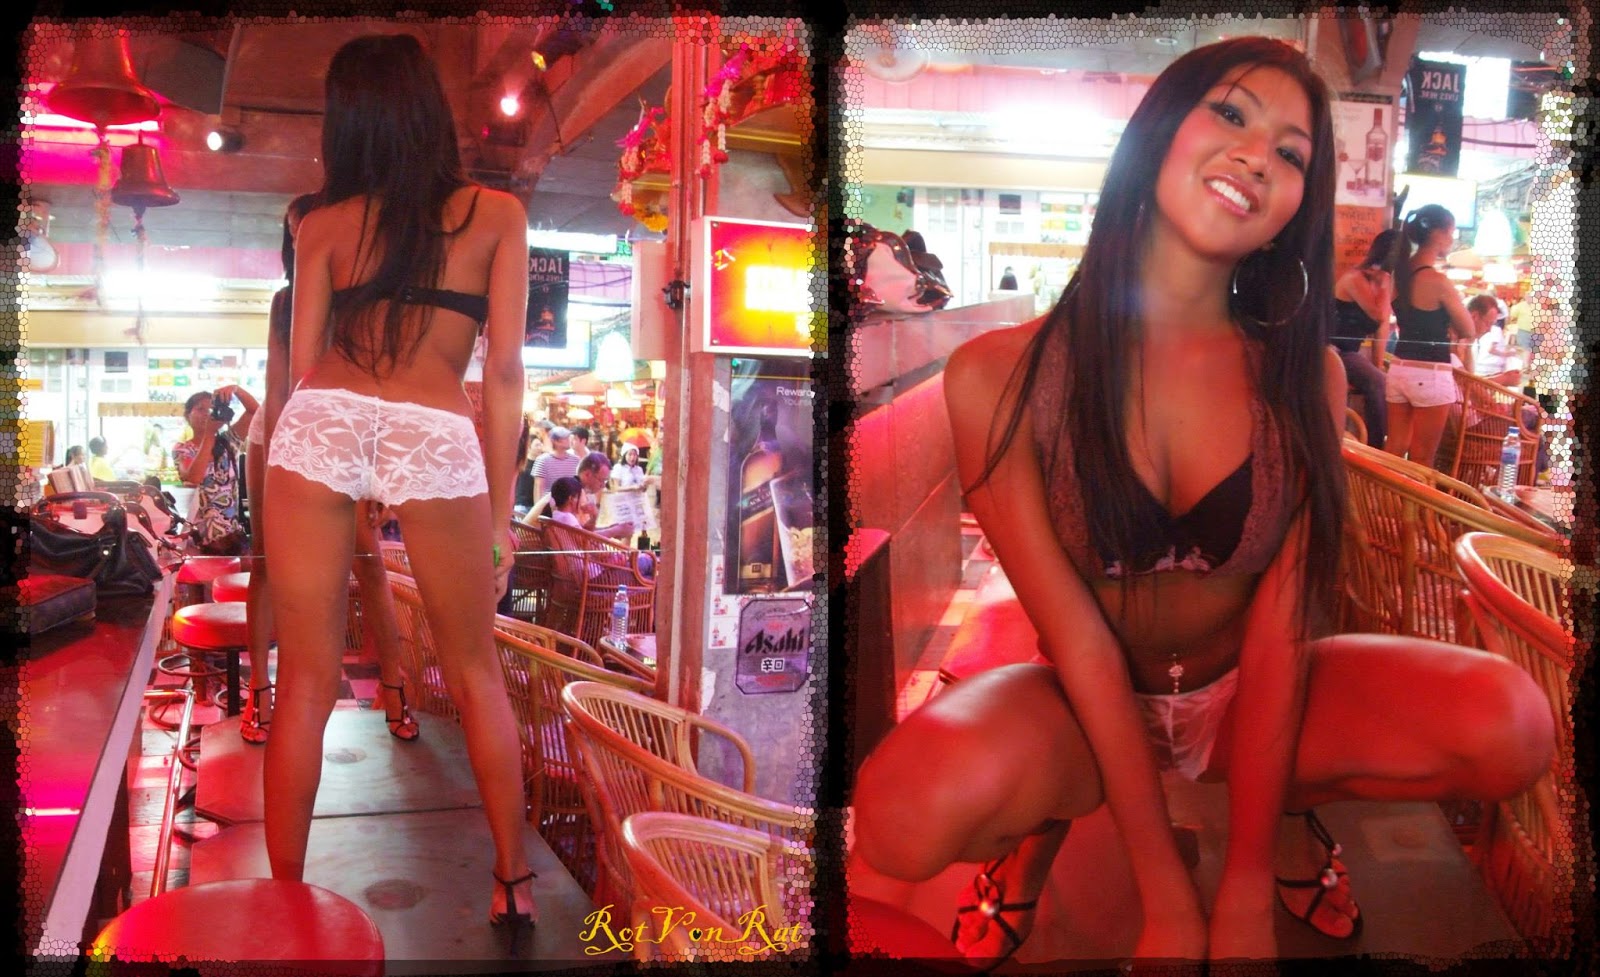 Travel And Leisure The Bangkok Sex Industry And World